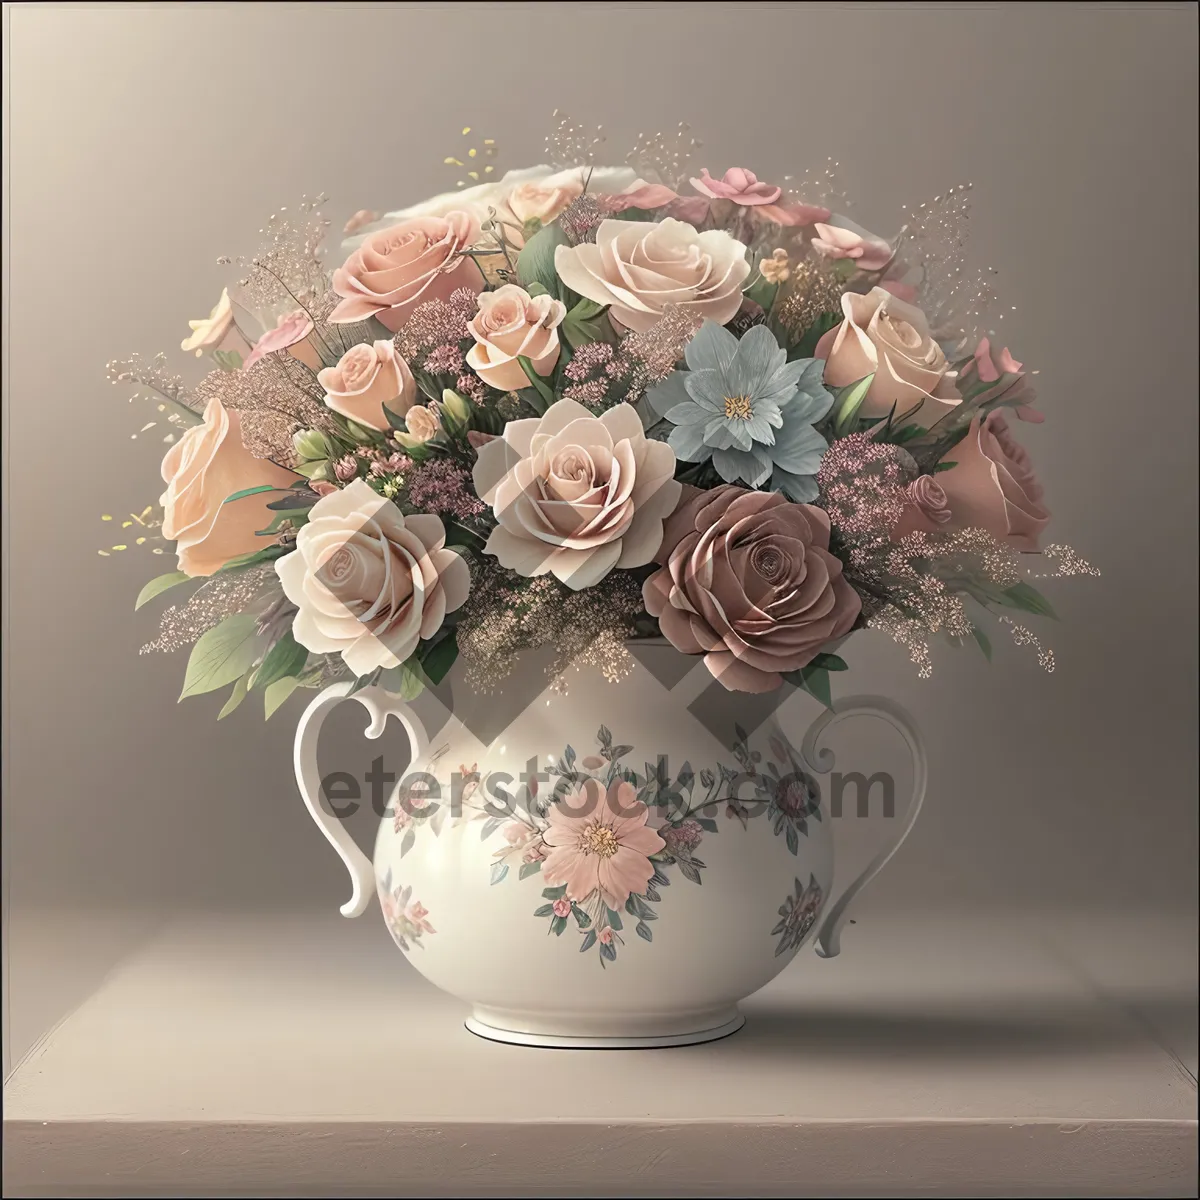 Picture of Winter Floral Ceramic Vase: Artistic Holiday Pottery